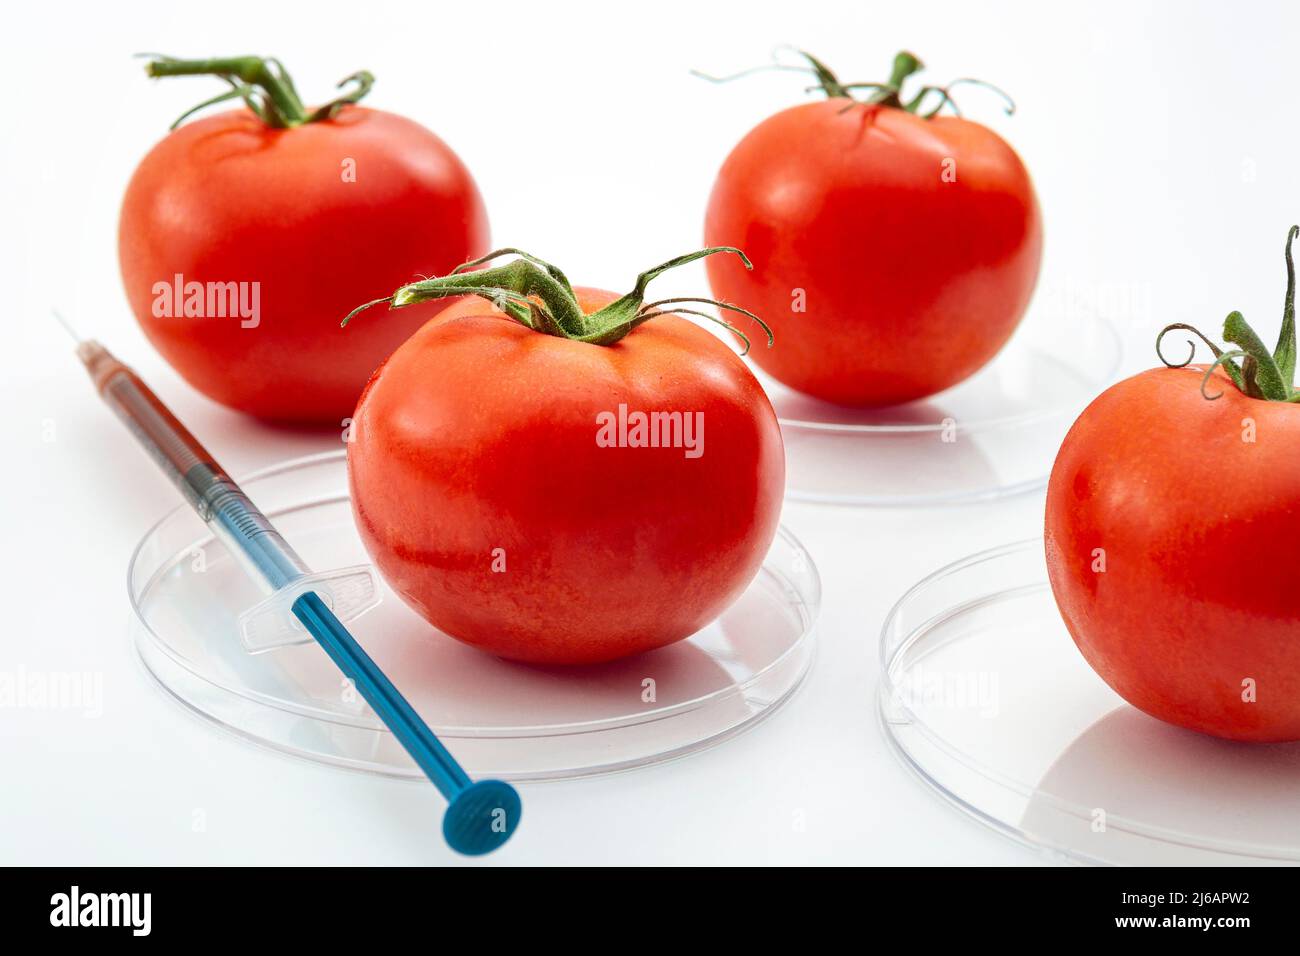 Genetically modified foods or GMO food, genetic improvement of produce and dna manipulation conceptual idea with red tomato, petri dish and a syringe Stock Photo